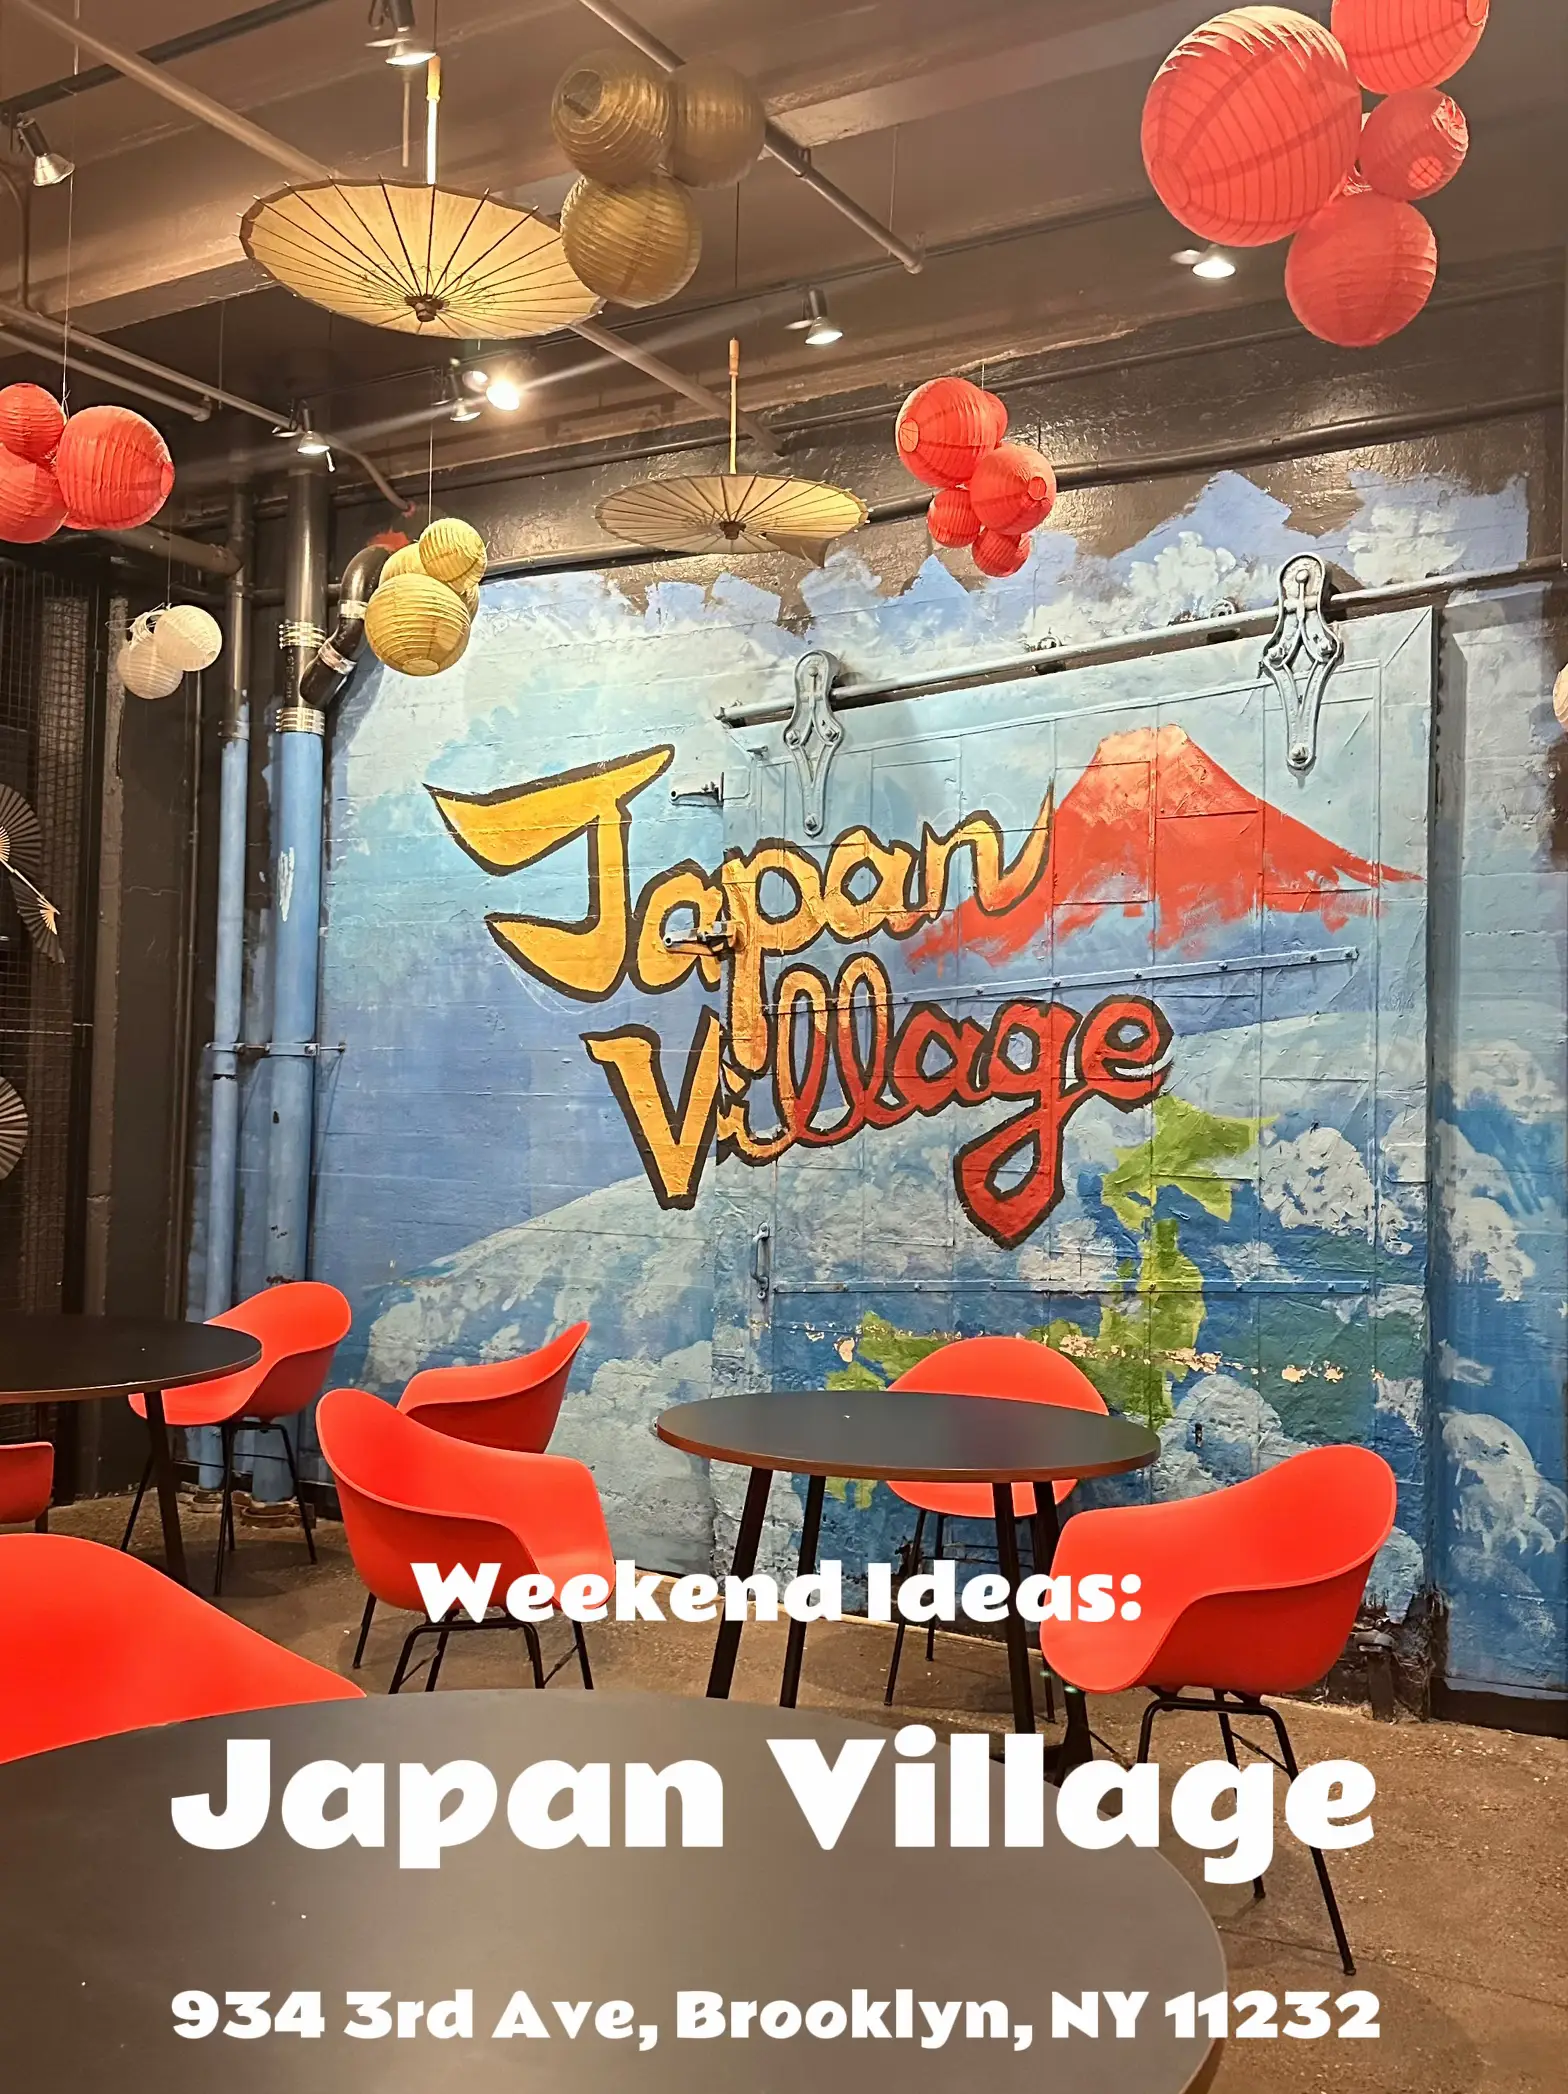  A restaurant with a mural of a beach and the words "Japan Village" on the wall.